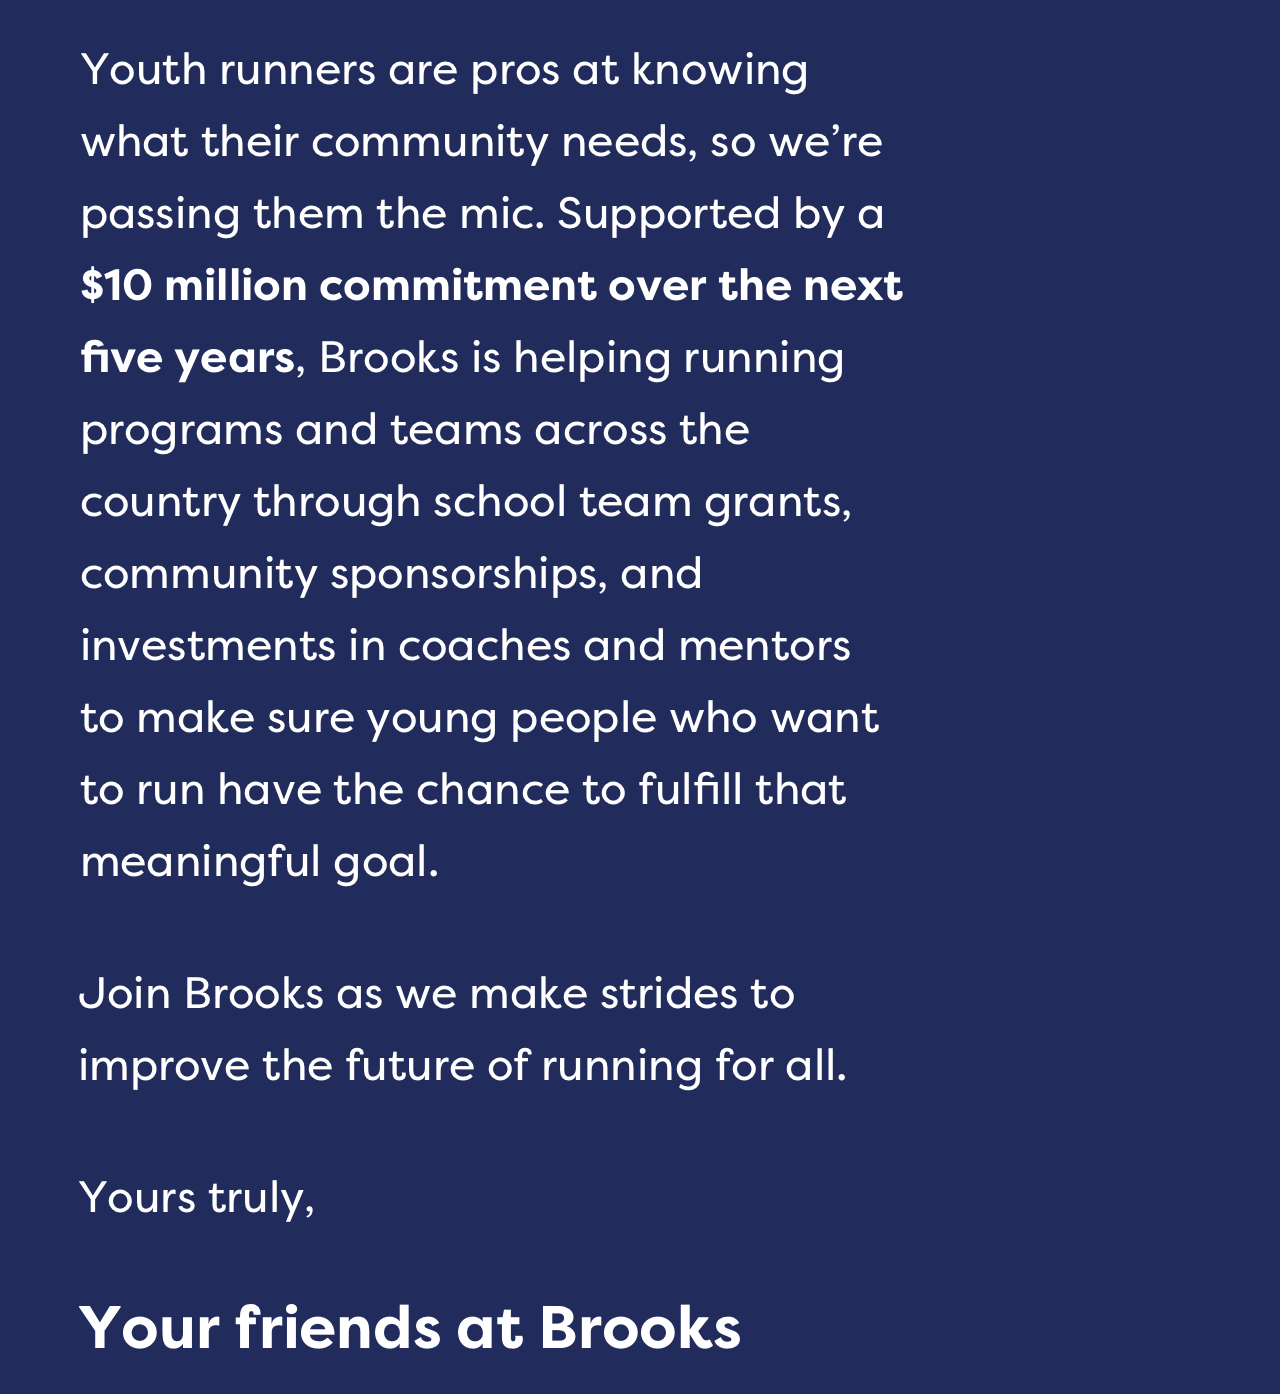 Youth runners are pros at knowing what their community needs, so we're passing them the mic. | Join Brooks as we make strides to improve the future of running for all.